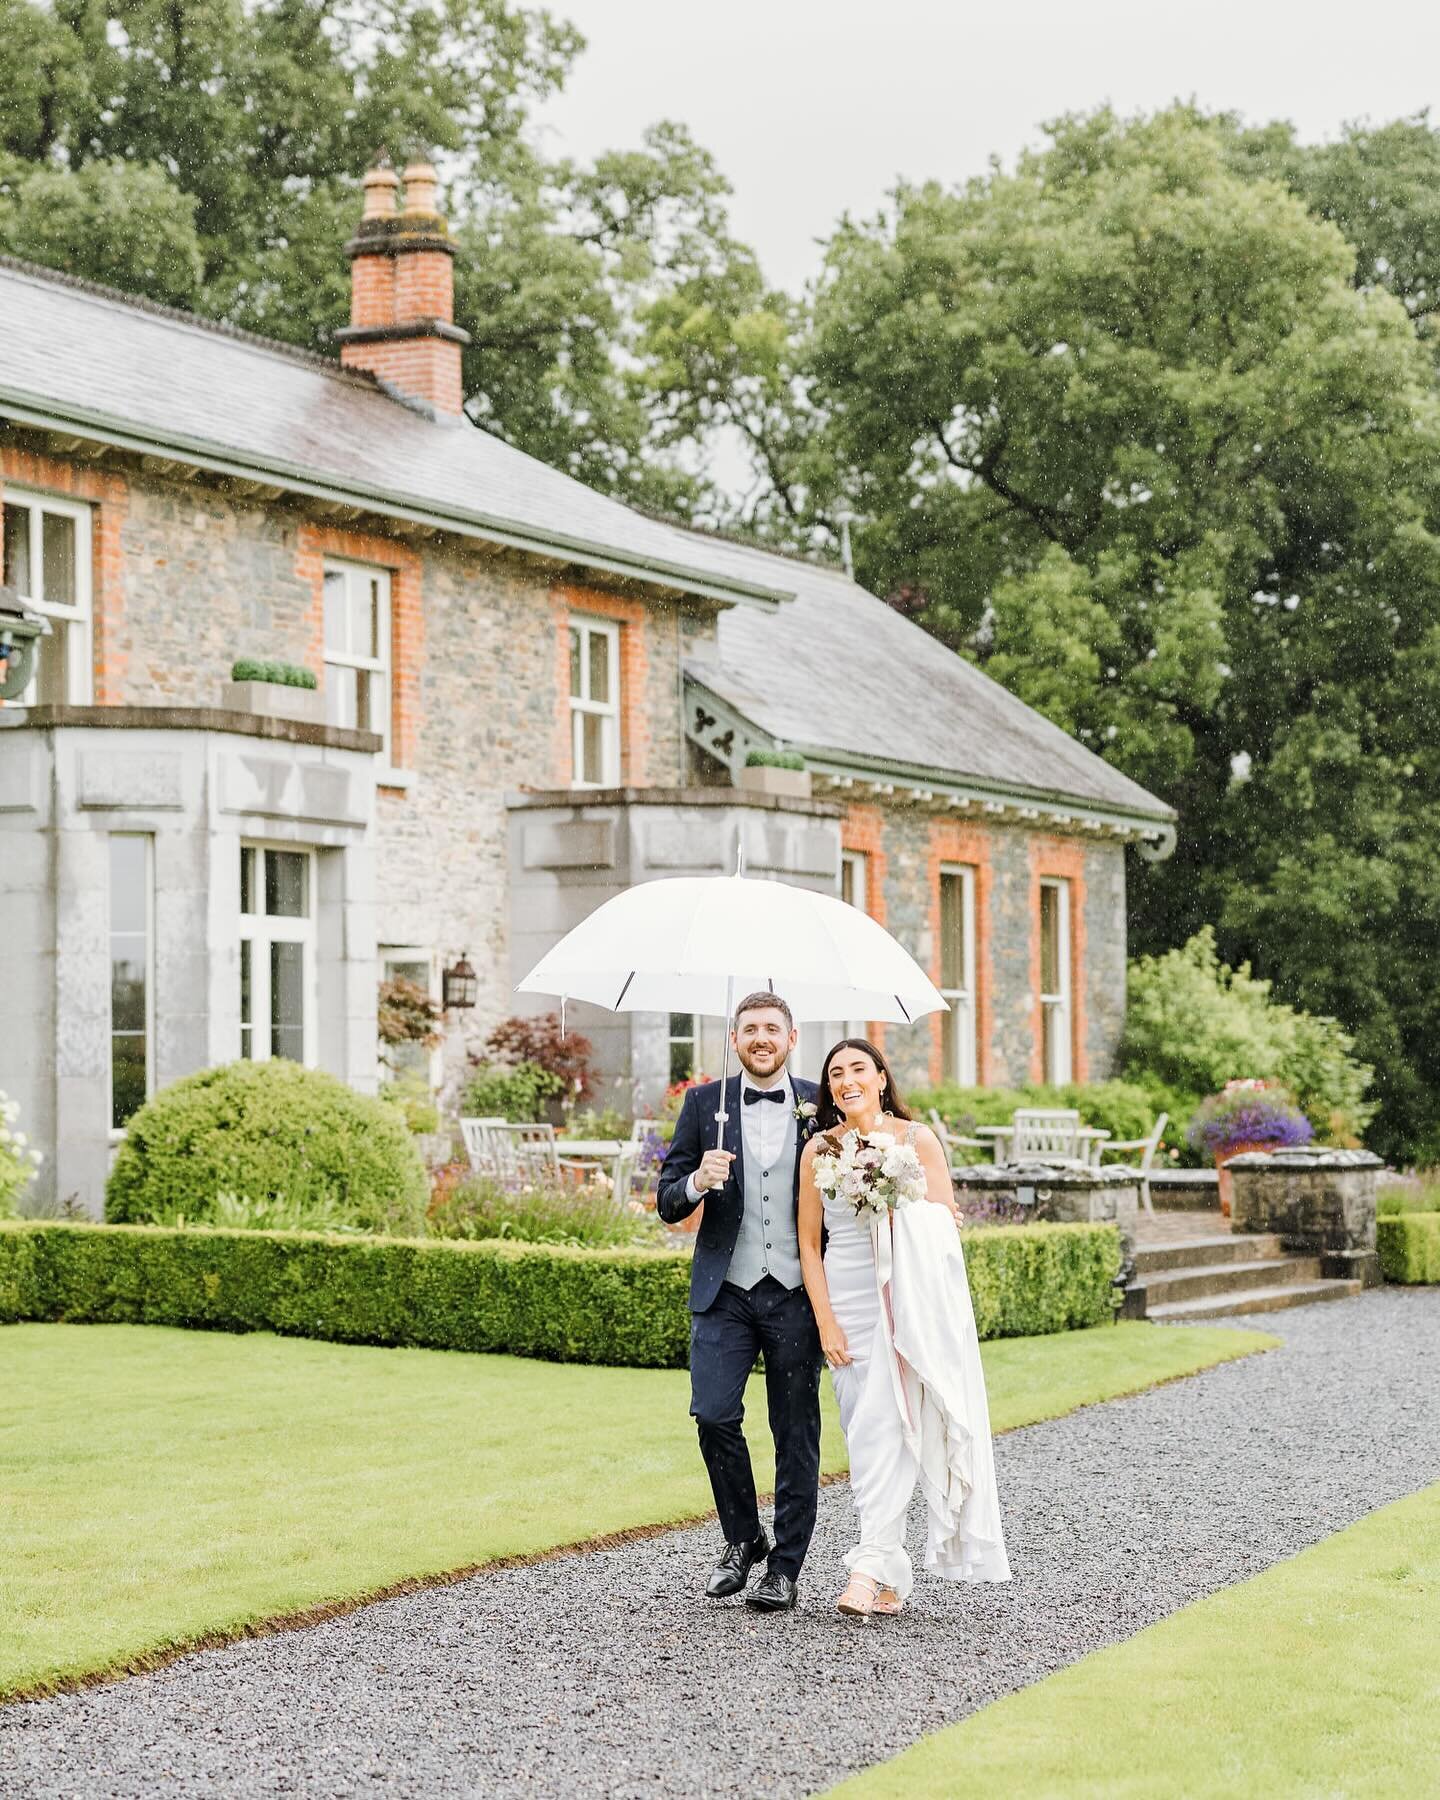 Laura &amp; Kevin had their wedding day in Virginia Park Lodge on one of those soft rainy days in July :) We needed just a few minutes of dry weather for outside photos and we got them just as the couple arrived at the venue. We went straight into ph